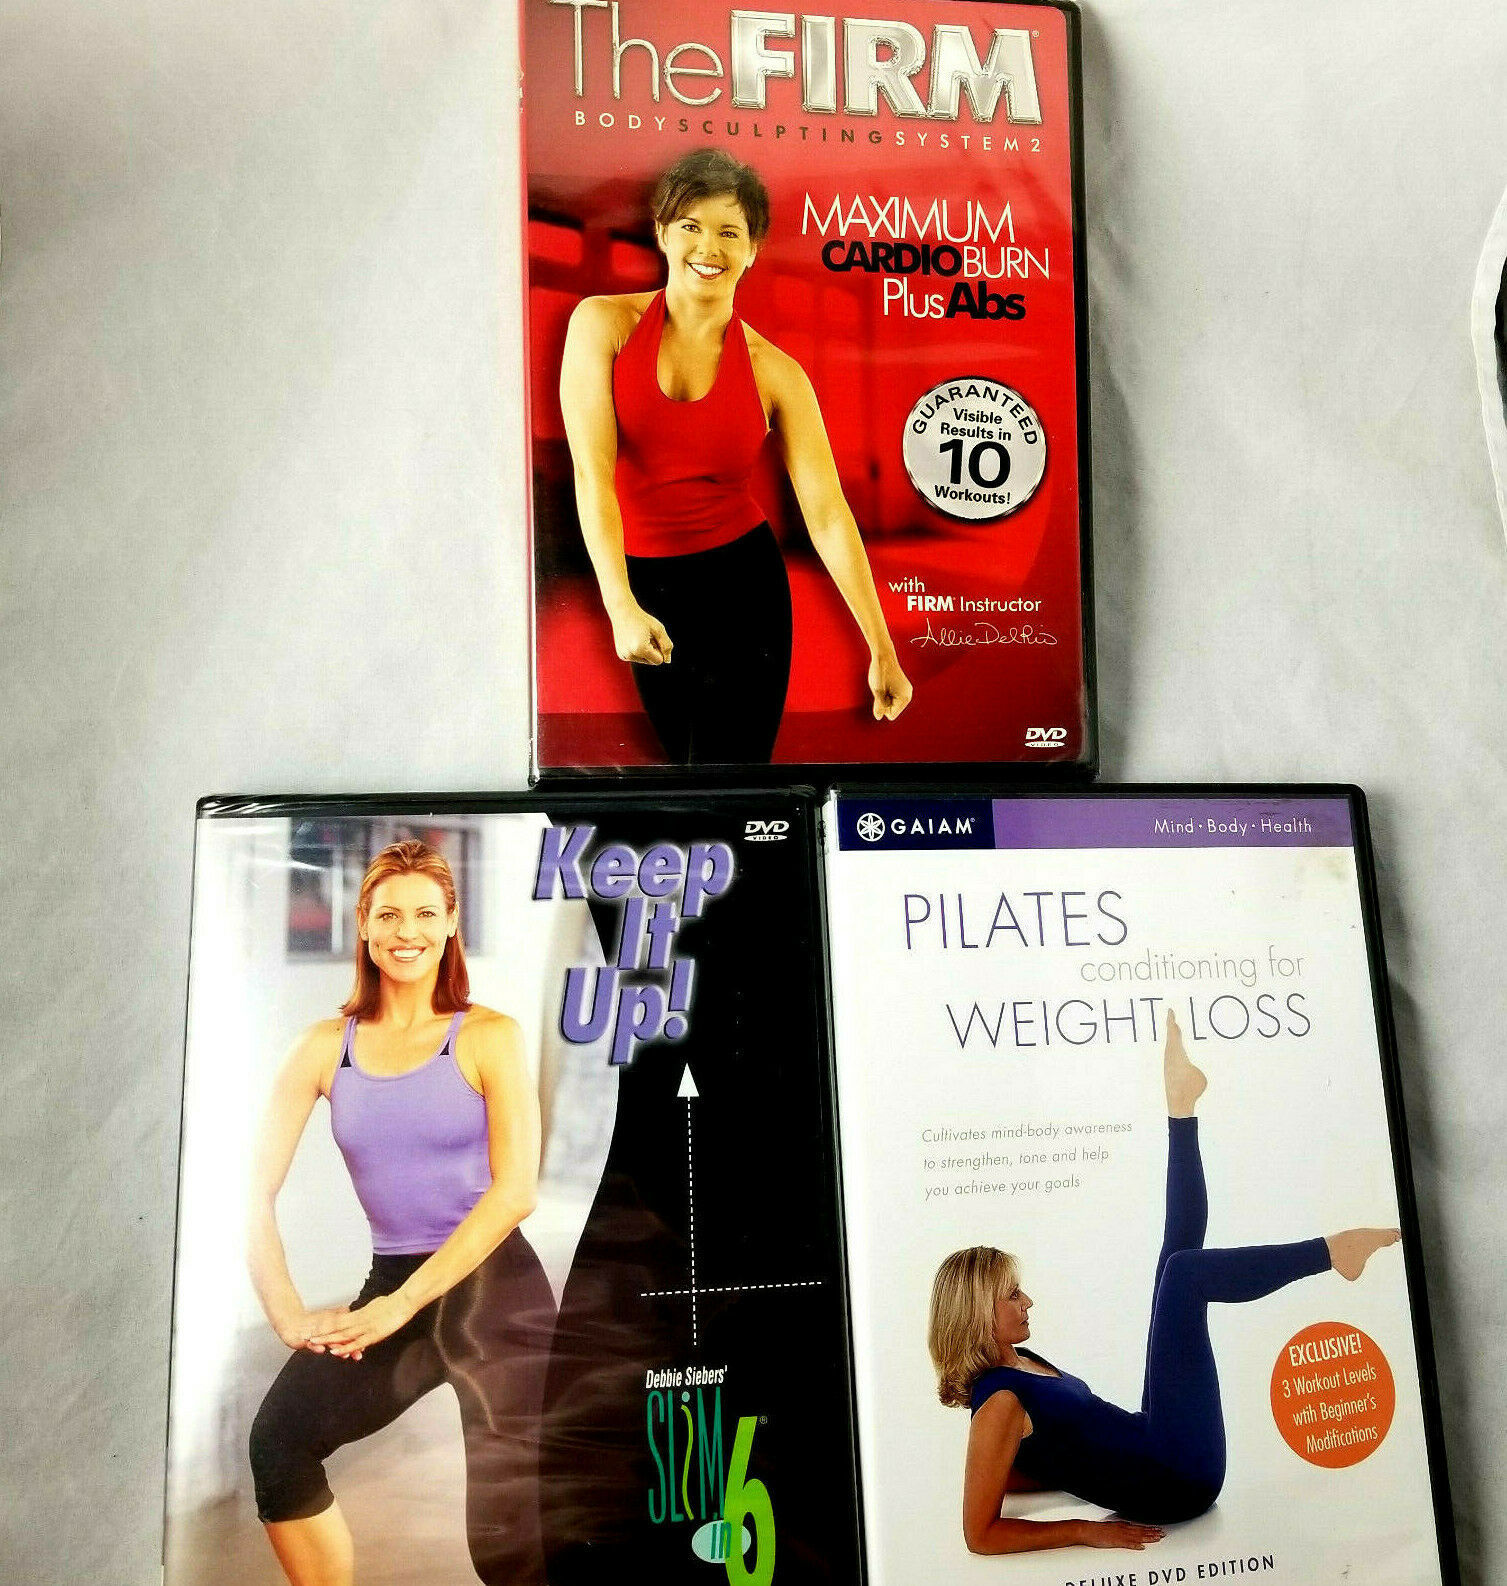 Primary image for Lot of 3 Workout Videos Pilates for Weight Loss, The Firm Cardio Burn, Slim in 6